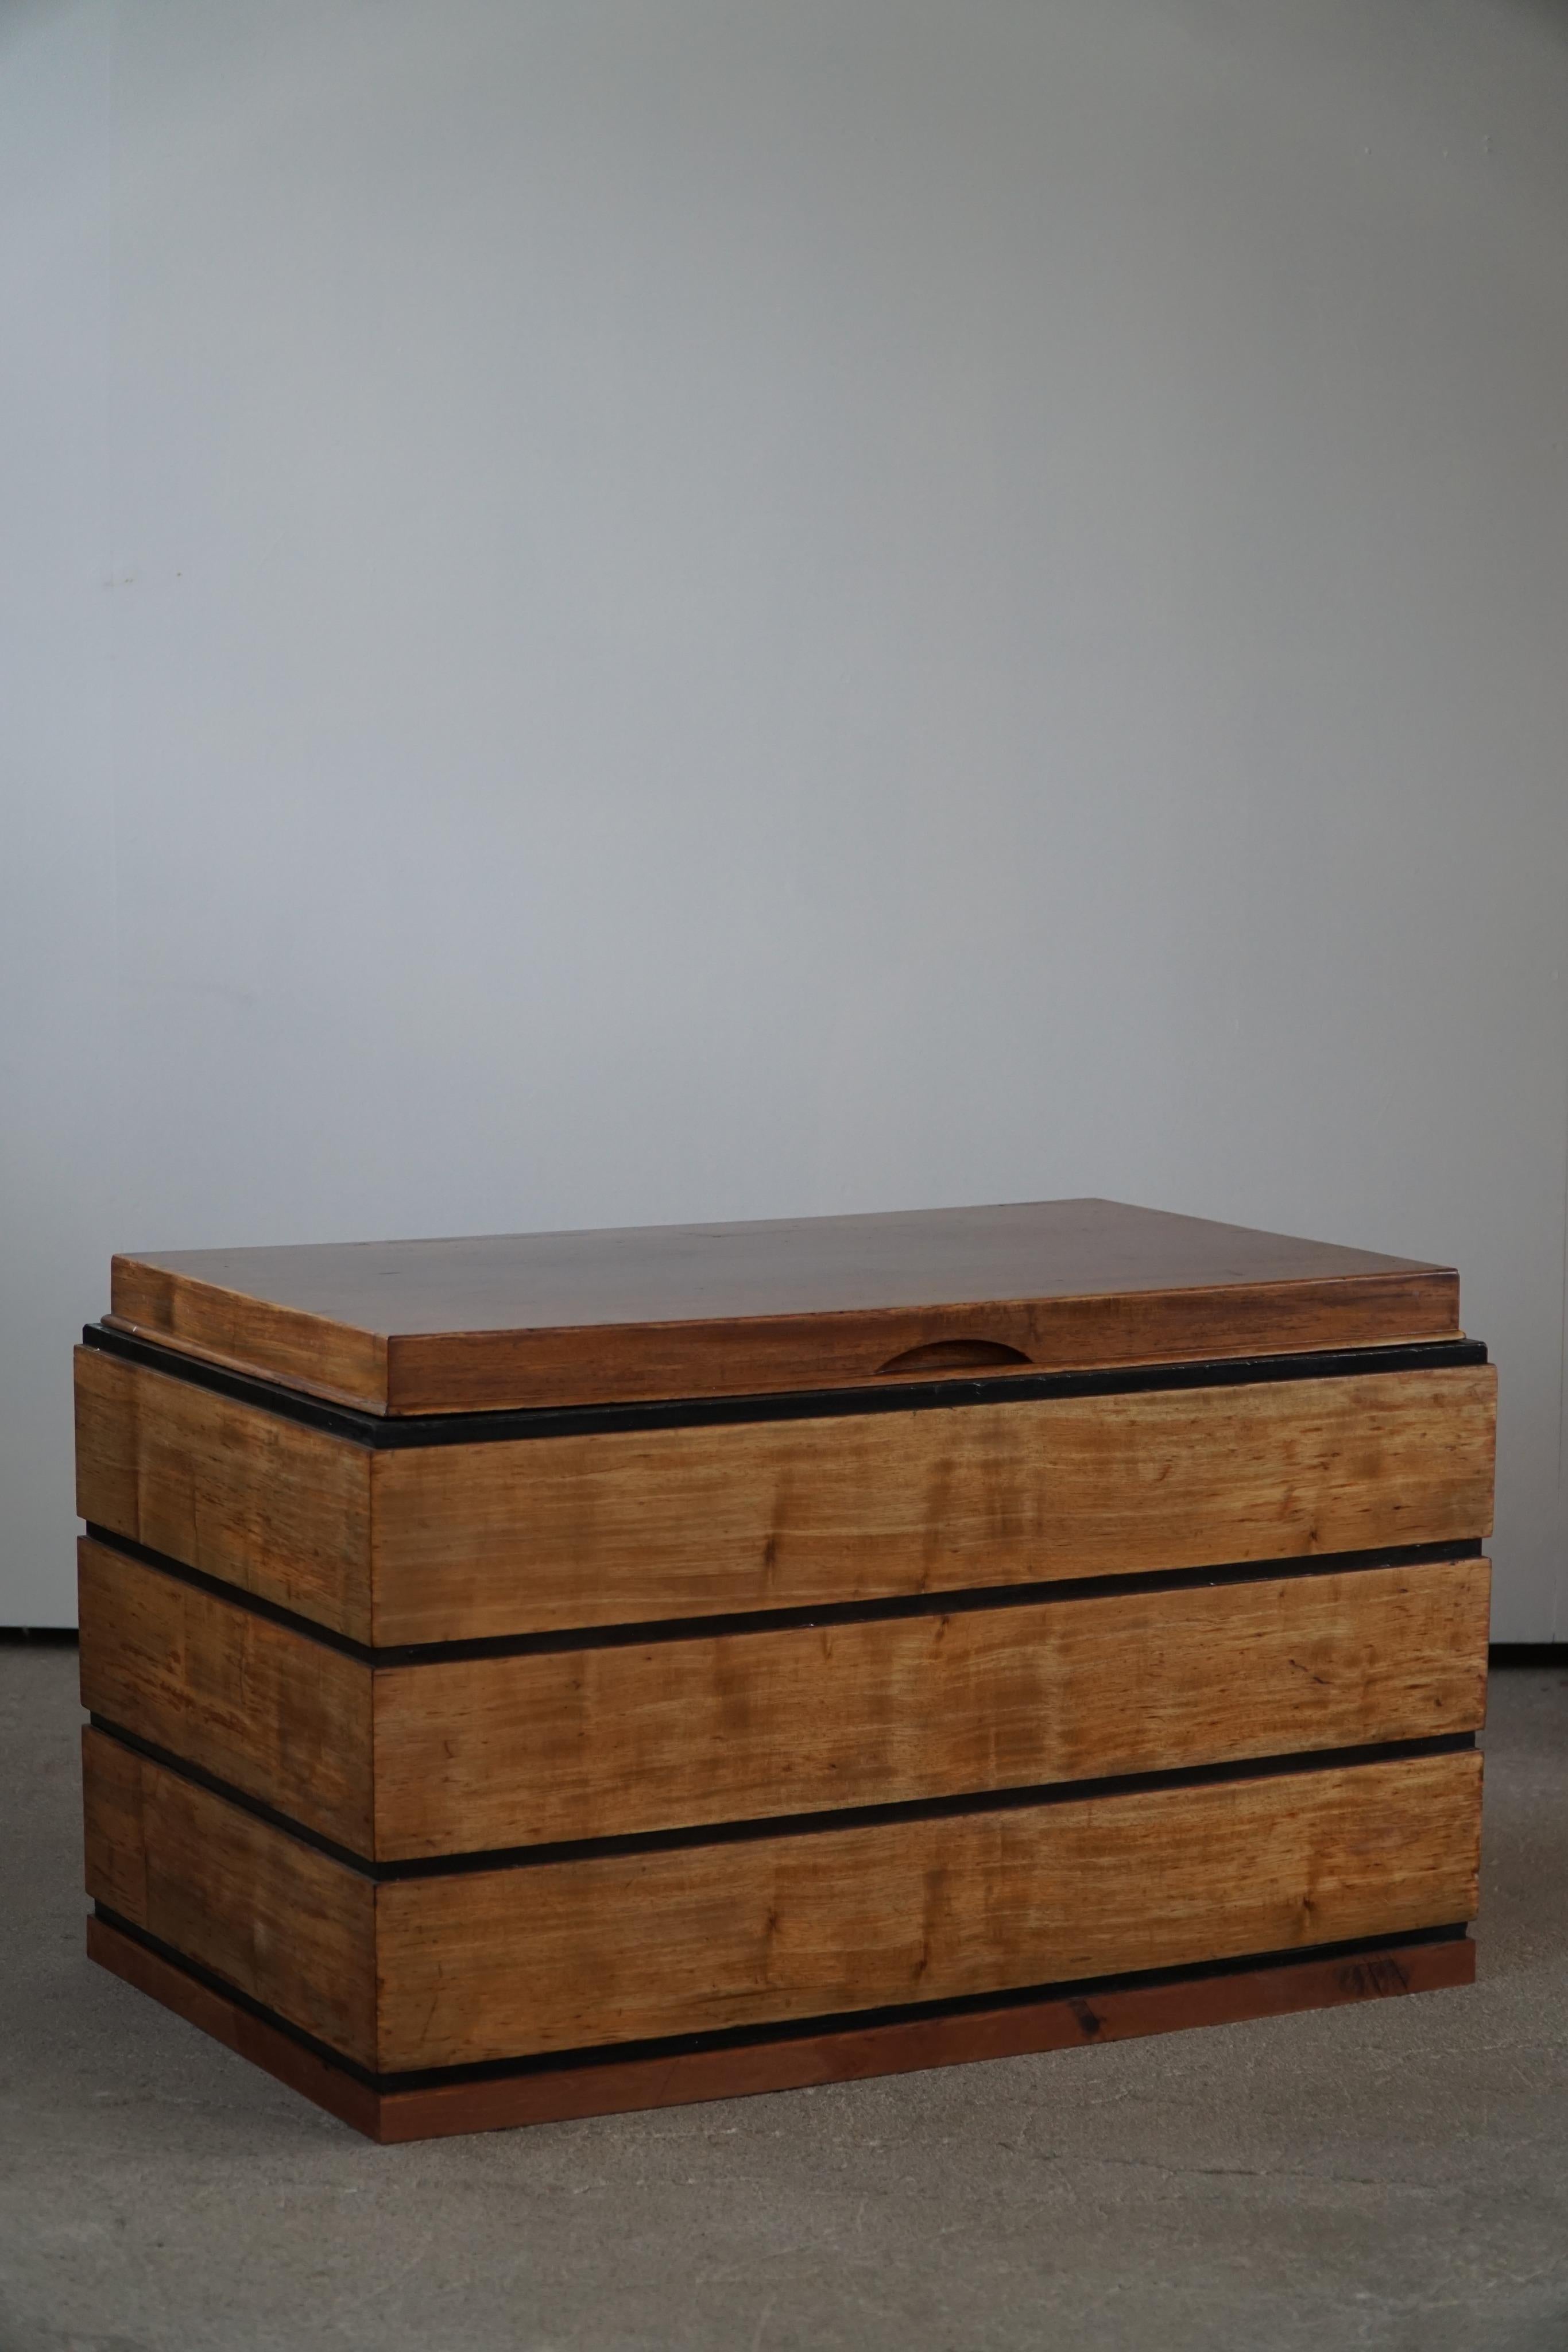 20th Century Art Deco Side Table / Chest, Danish Cabinetmaker, Made in the 1940s